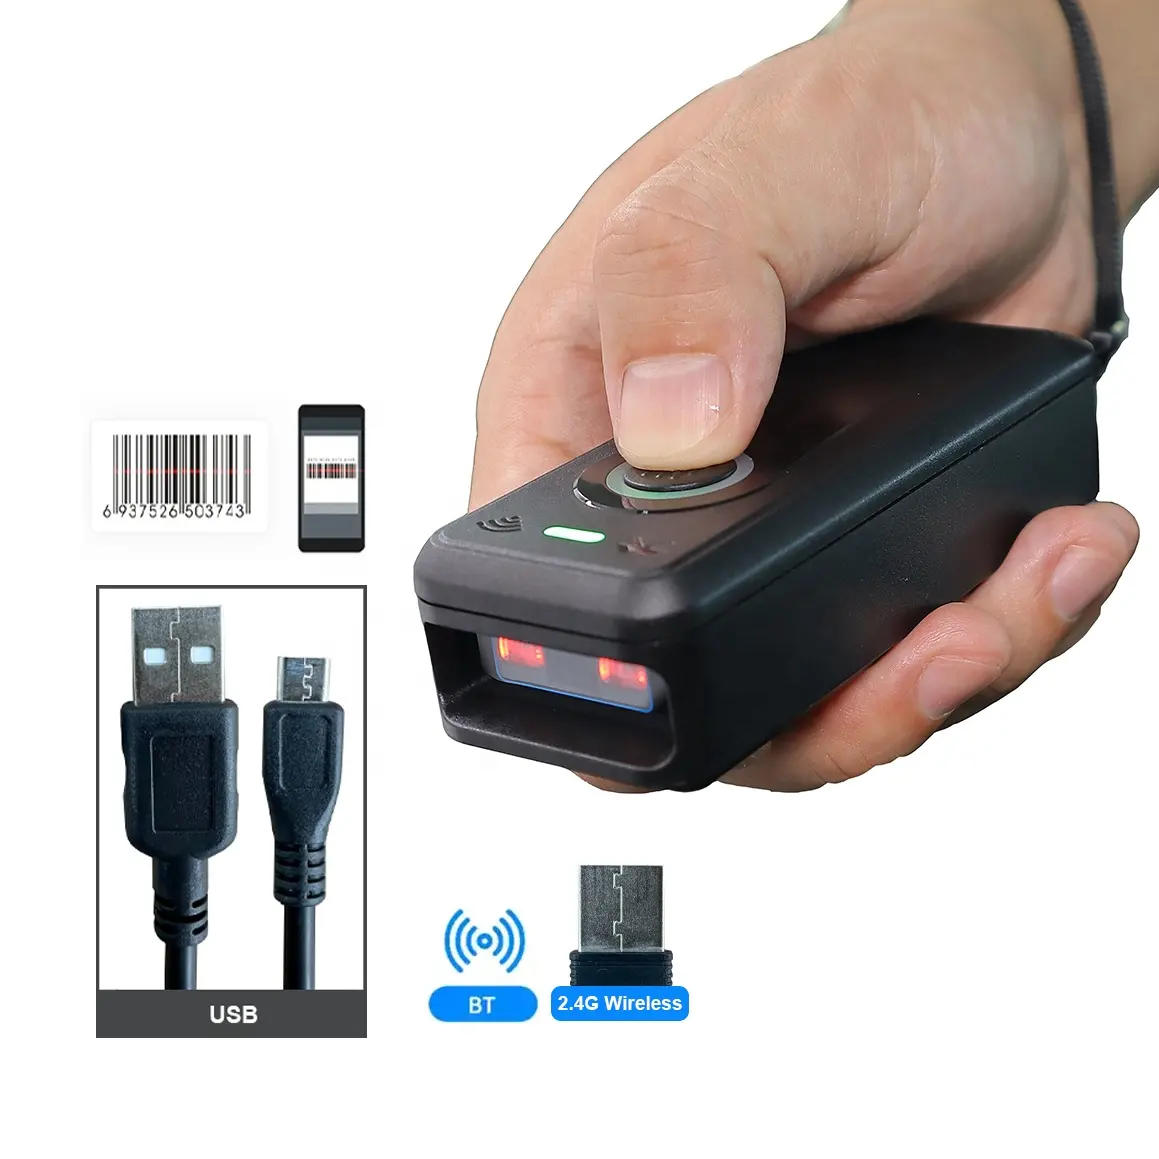 Support Connected Mobile Phone 2D QR 1D Wireless BT Pocket Mini Barcode Scanner For Pos Inventory Barcode Verify